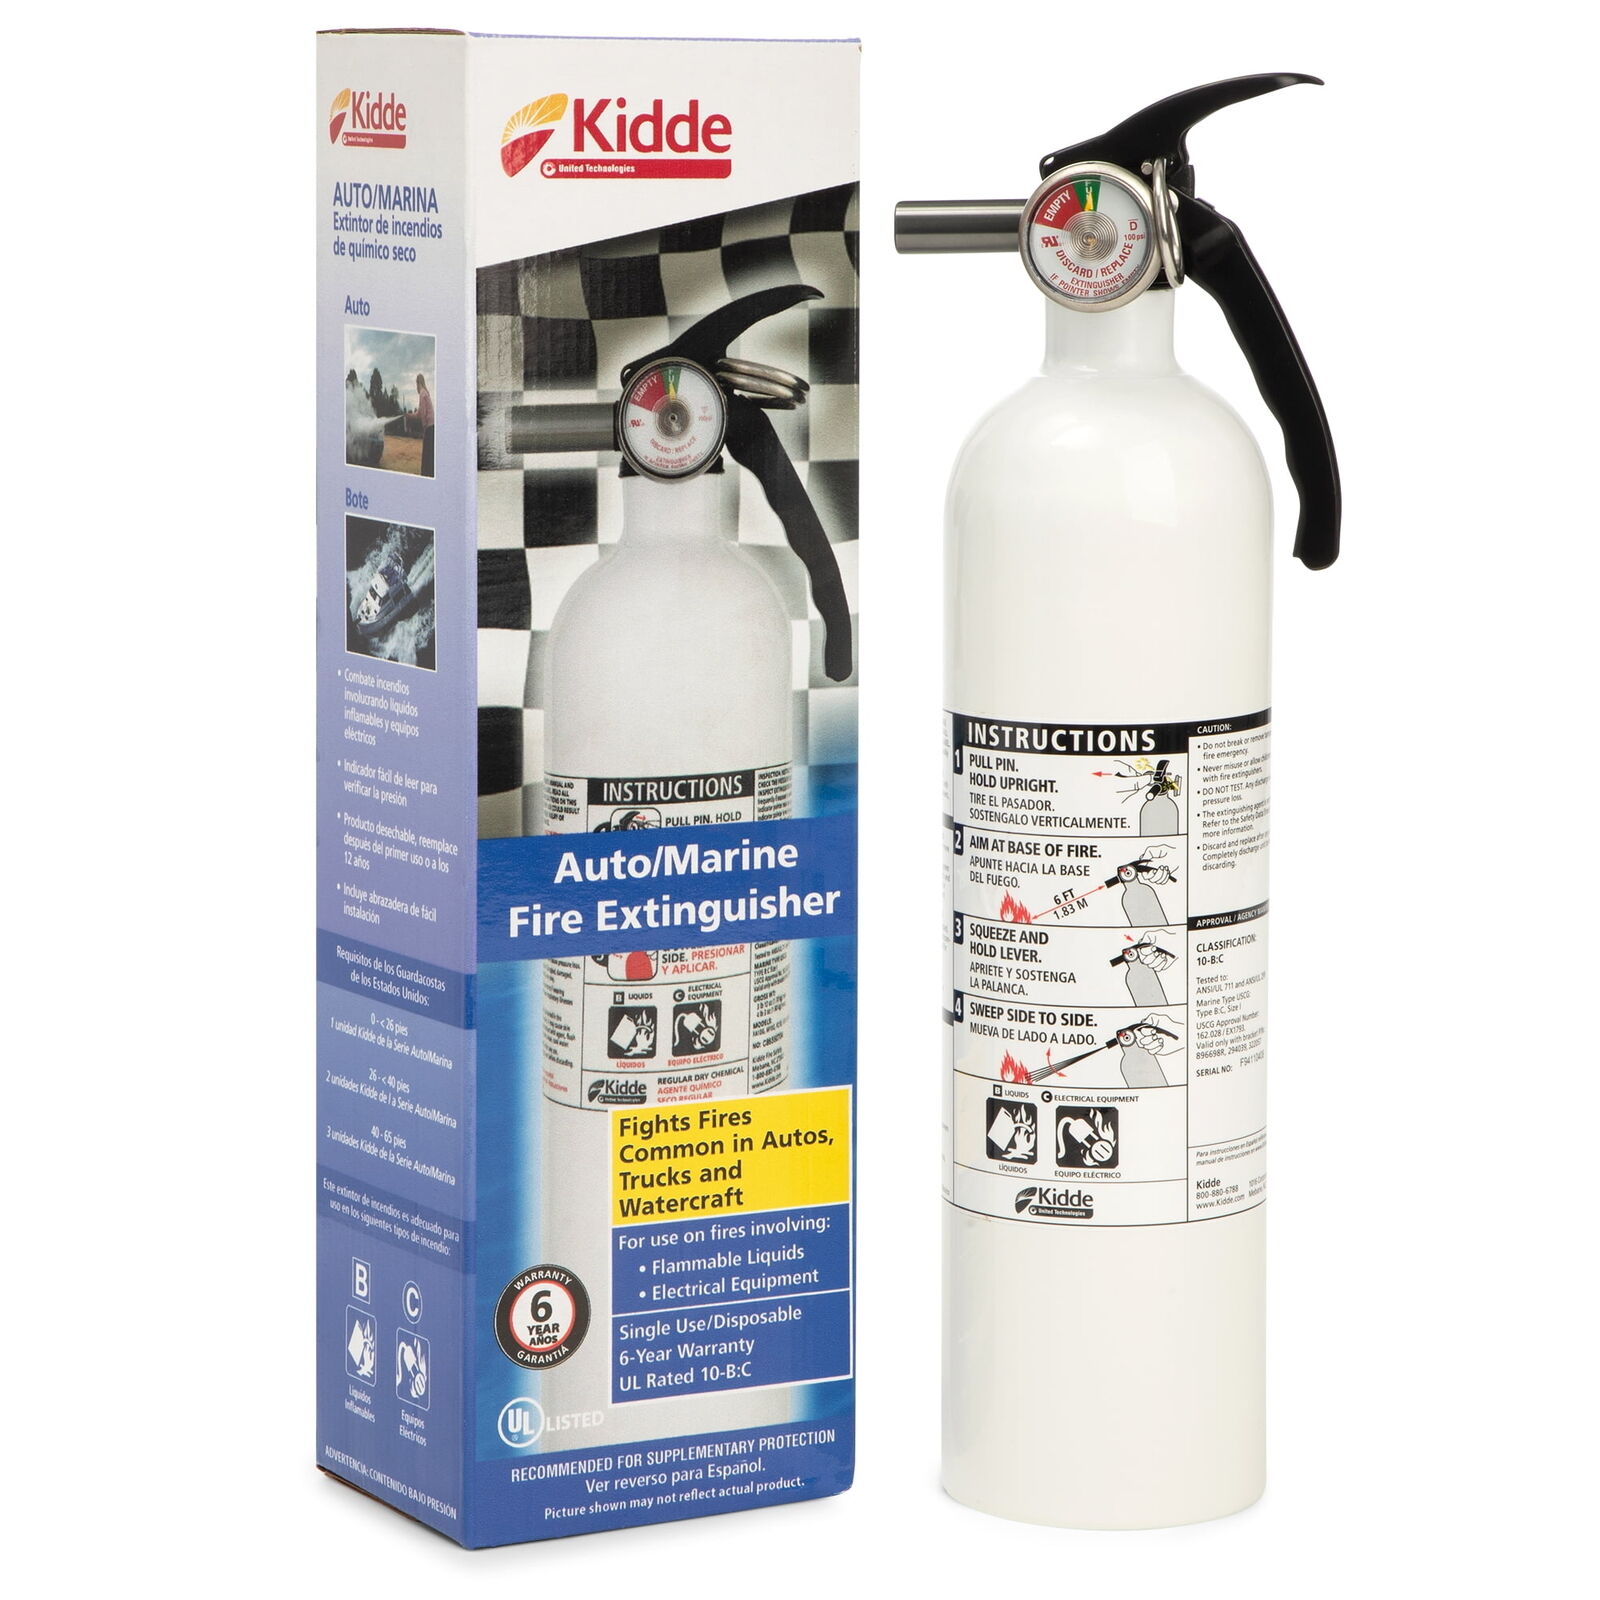 Auto/Marine UL Listed Fire Extinguisher, 10-B:C Rated